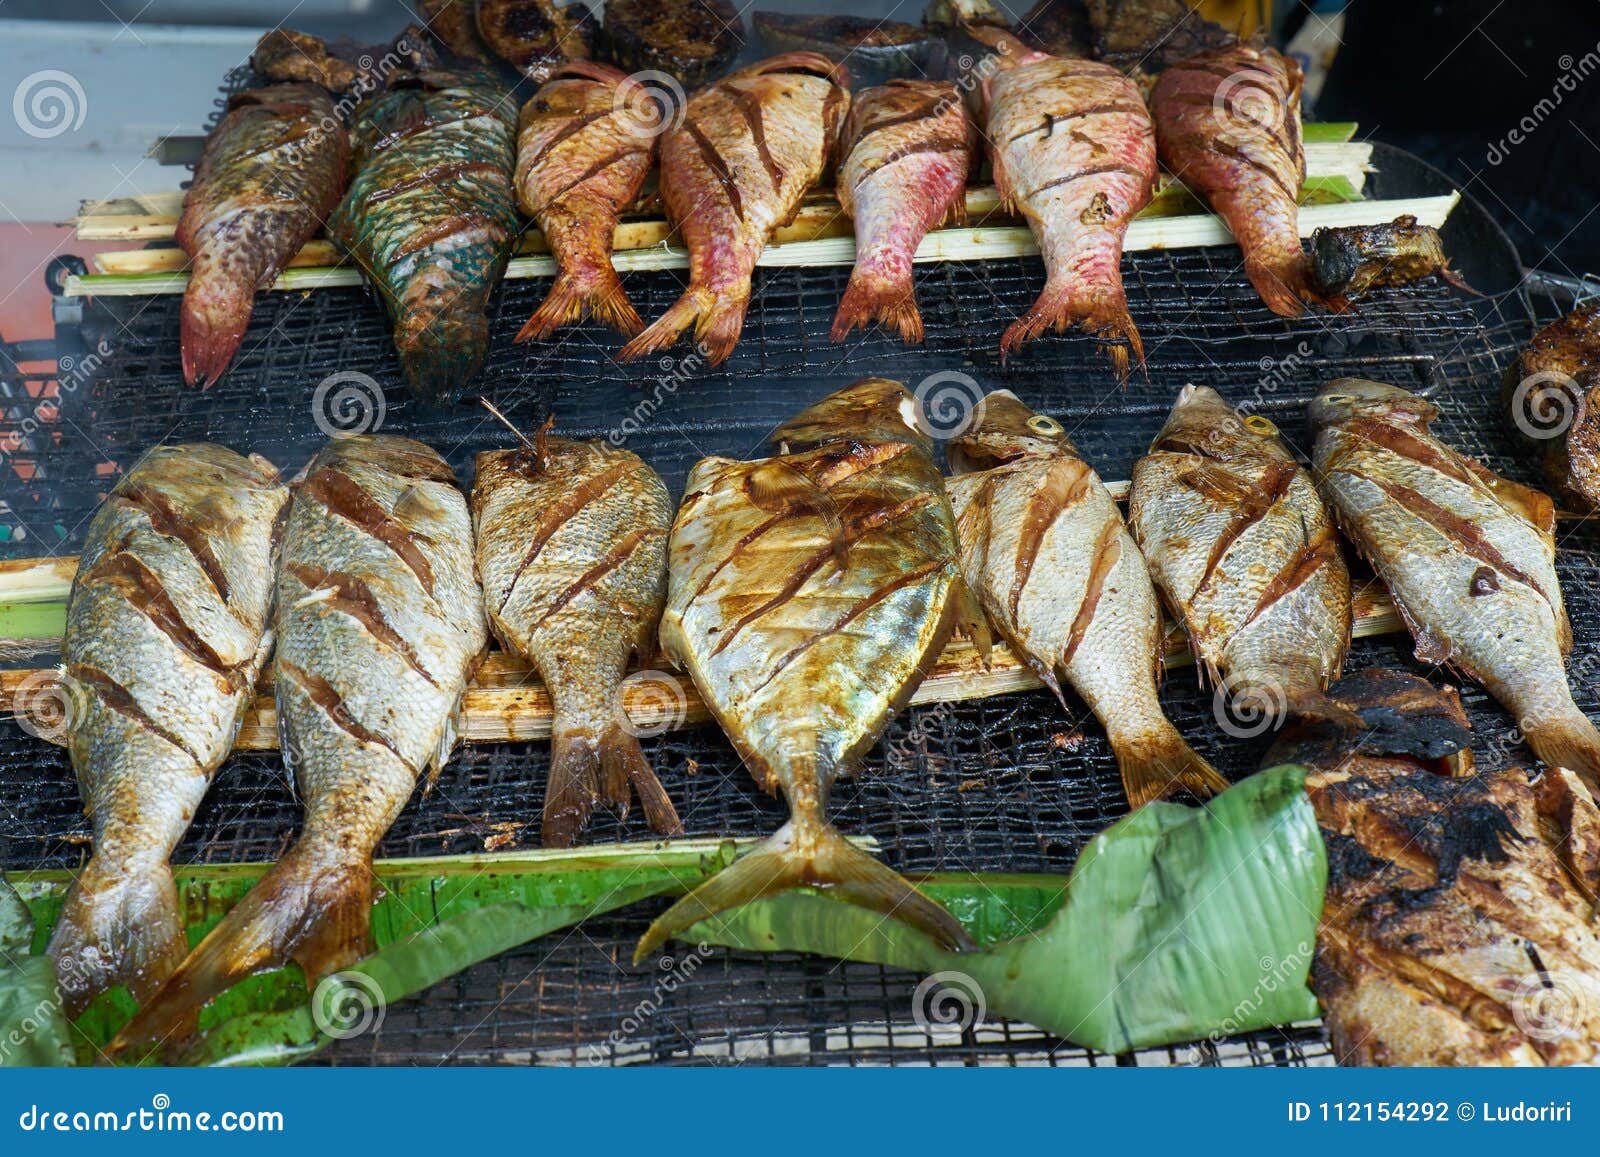 grilled fresh seafood in local market, mahÃÂ© - seychelles island